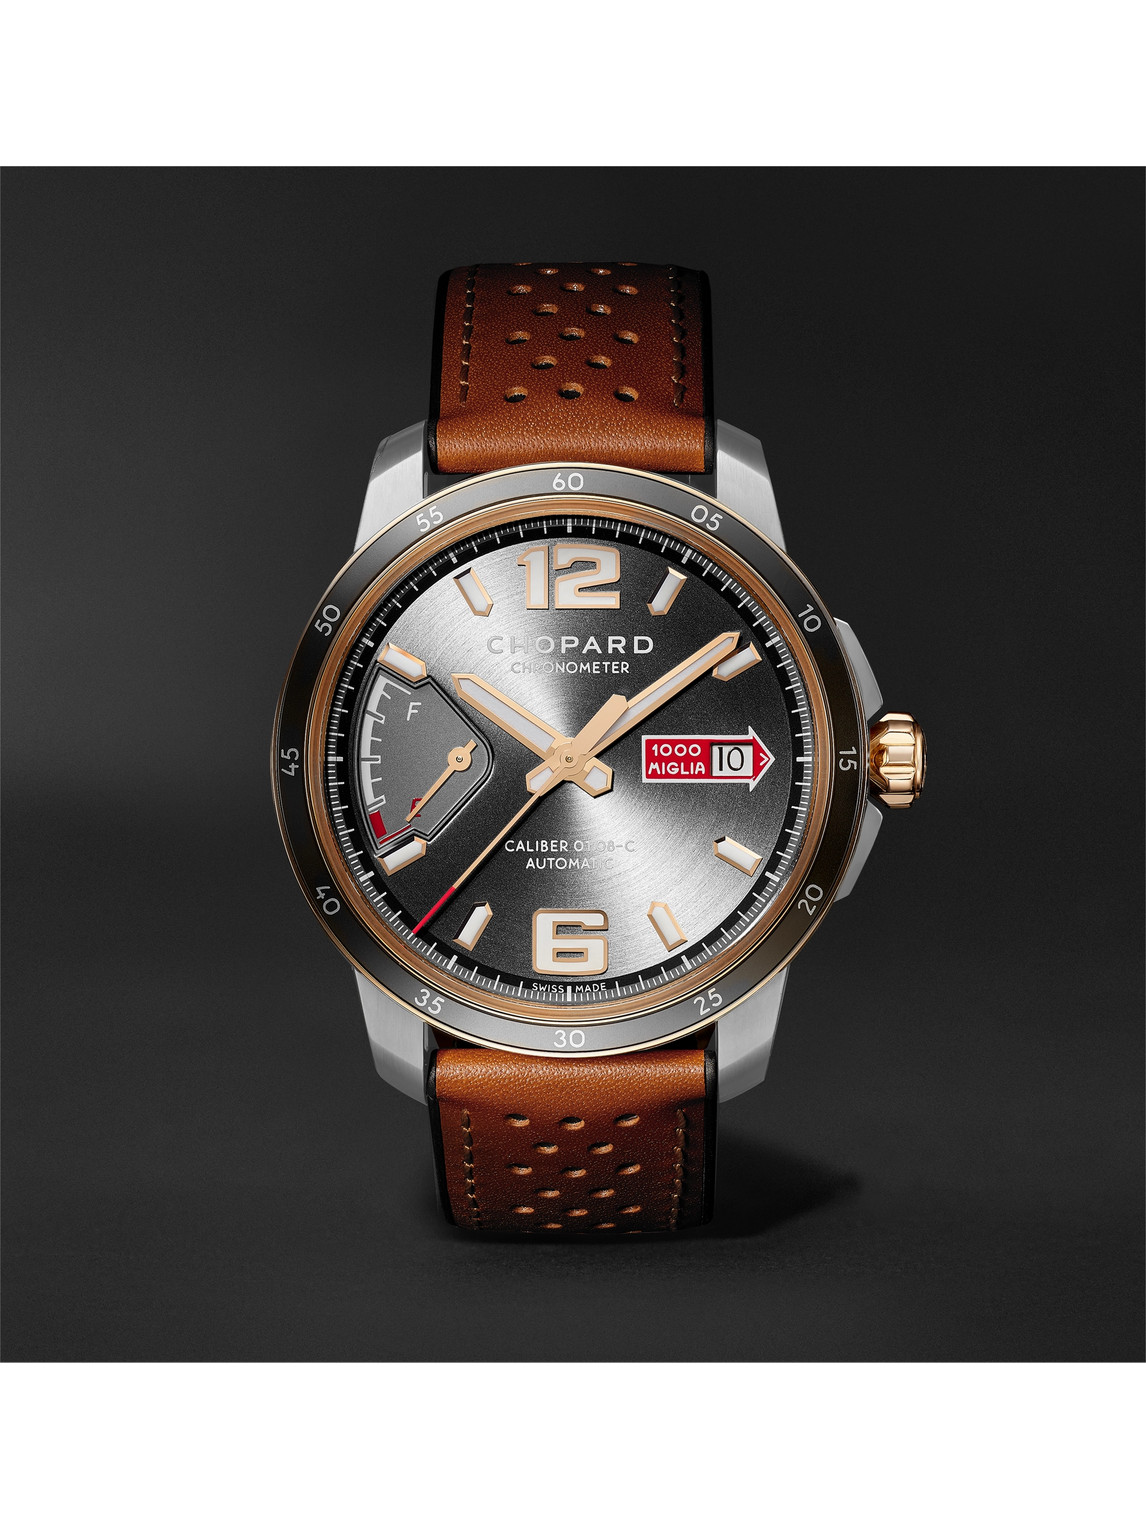 Chopard Mille Miglia Gts Power Control Limited Edition Automatic 43mm, 18-karat Rose Gold, Stainless Steel A In Gray